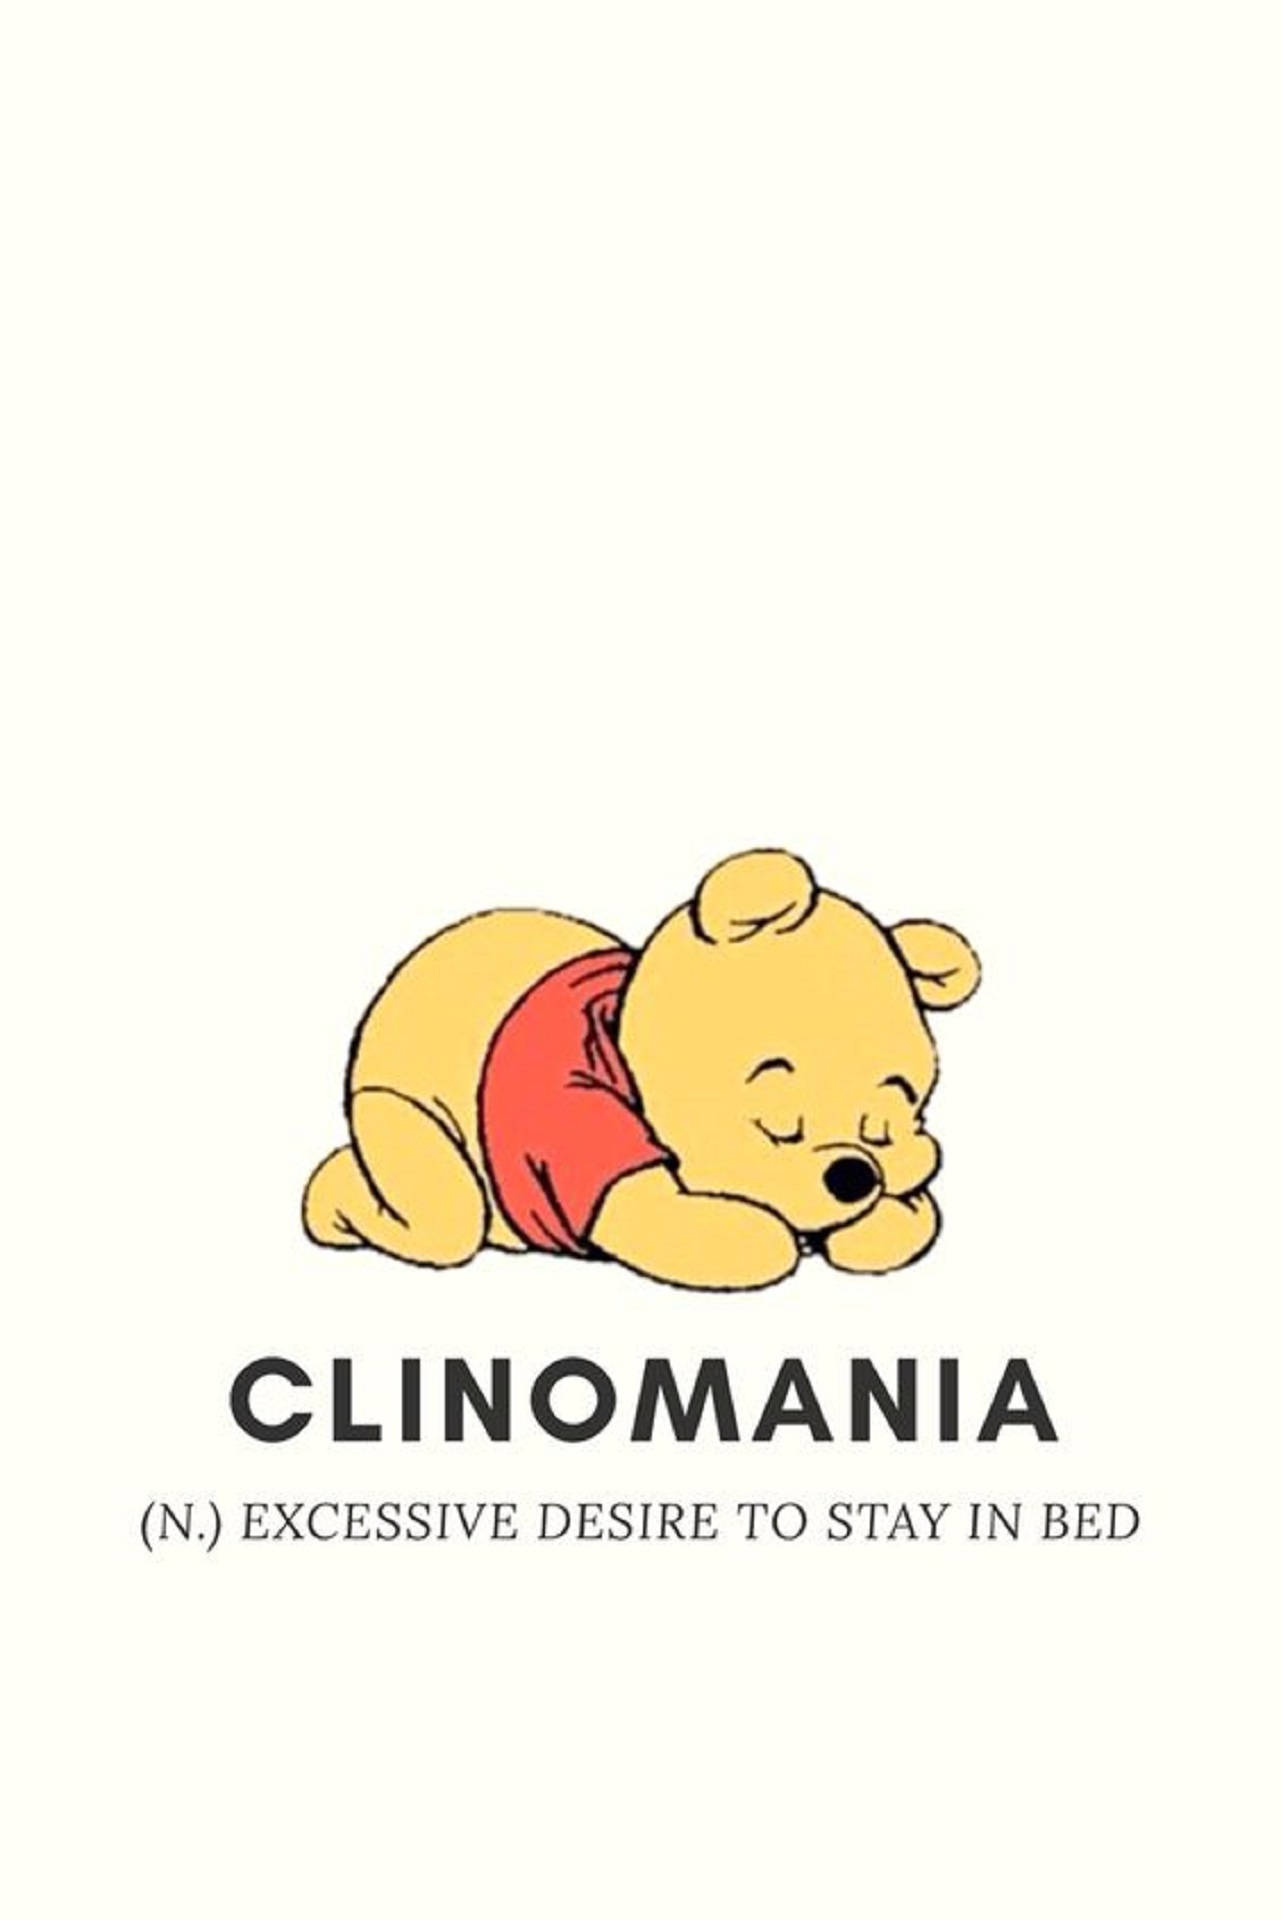 Winnie The Pooh Quotes On Clinomania Wallpaper